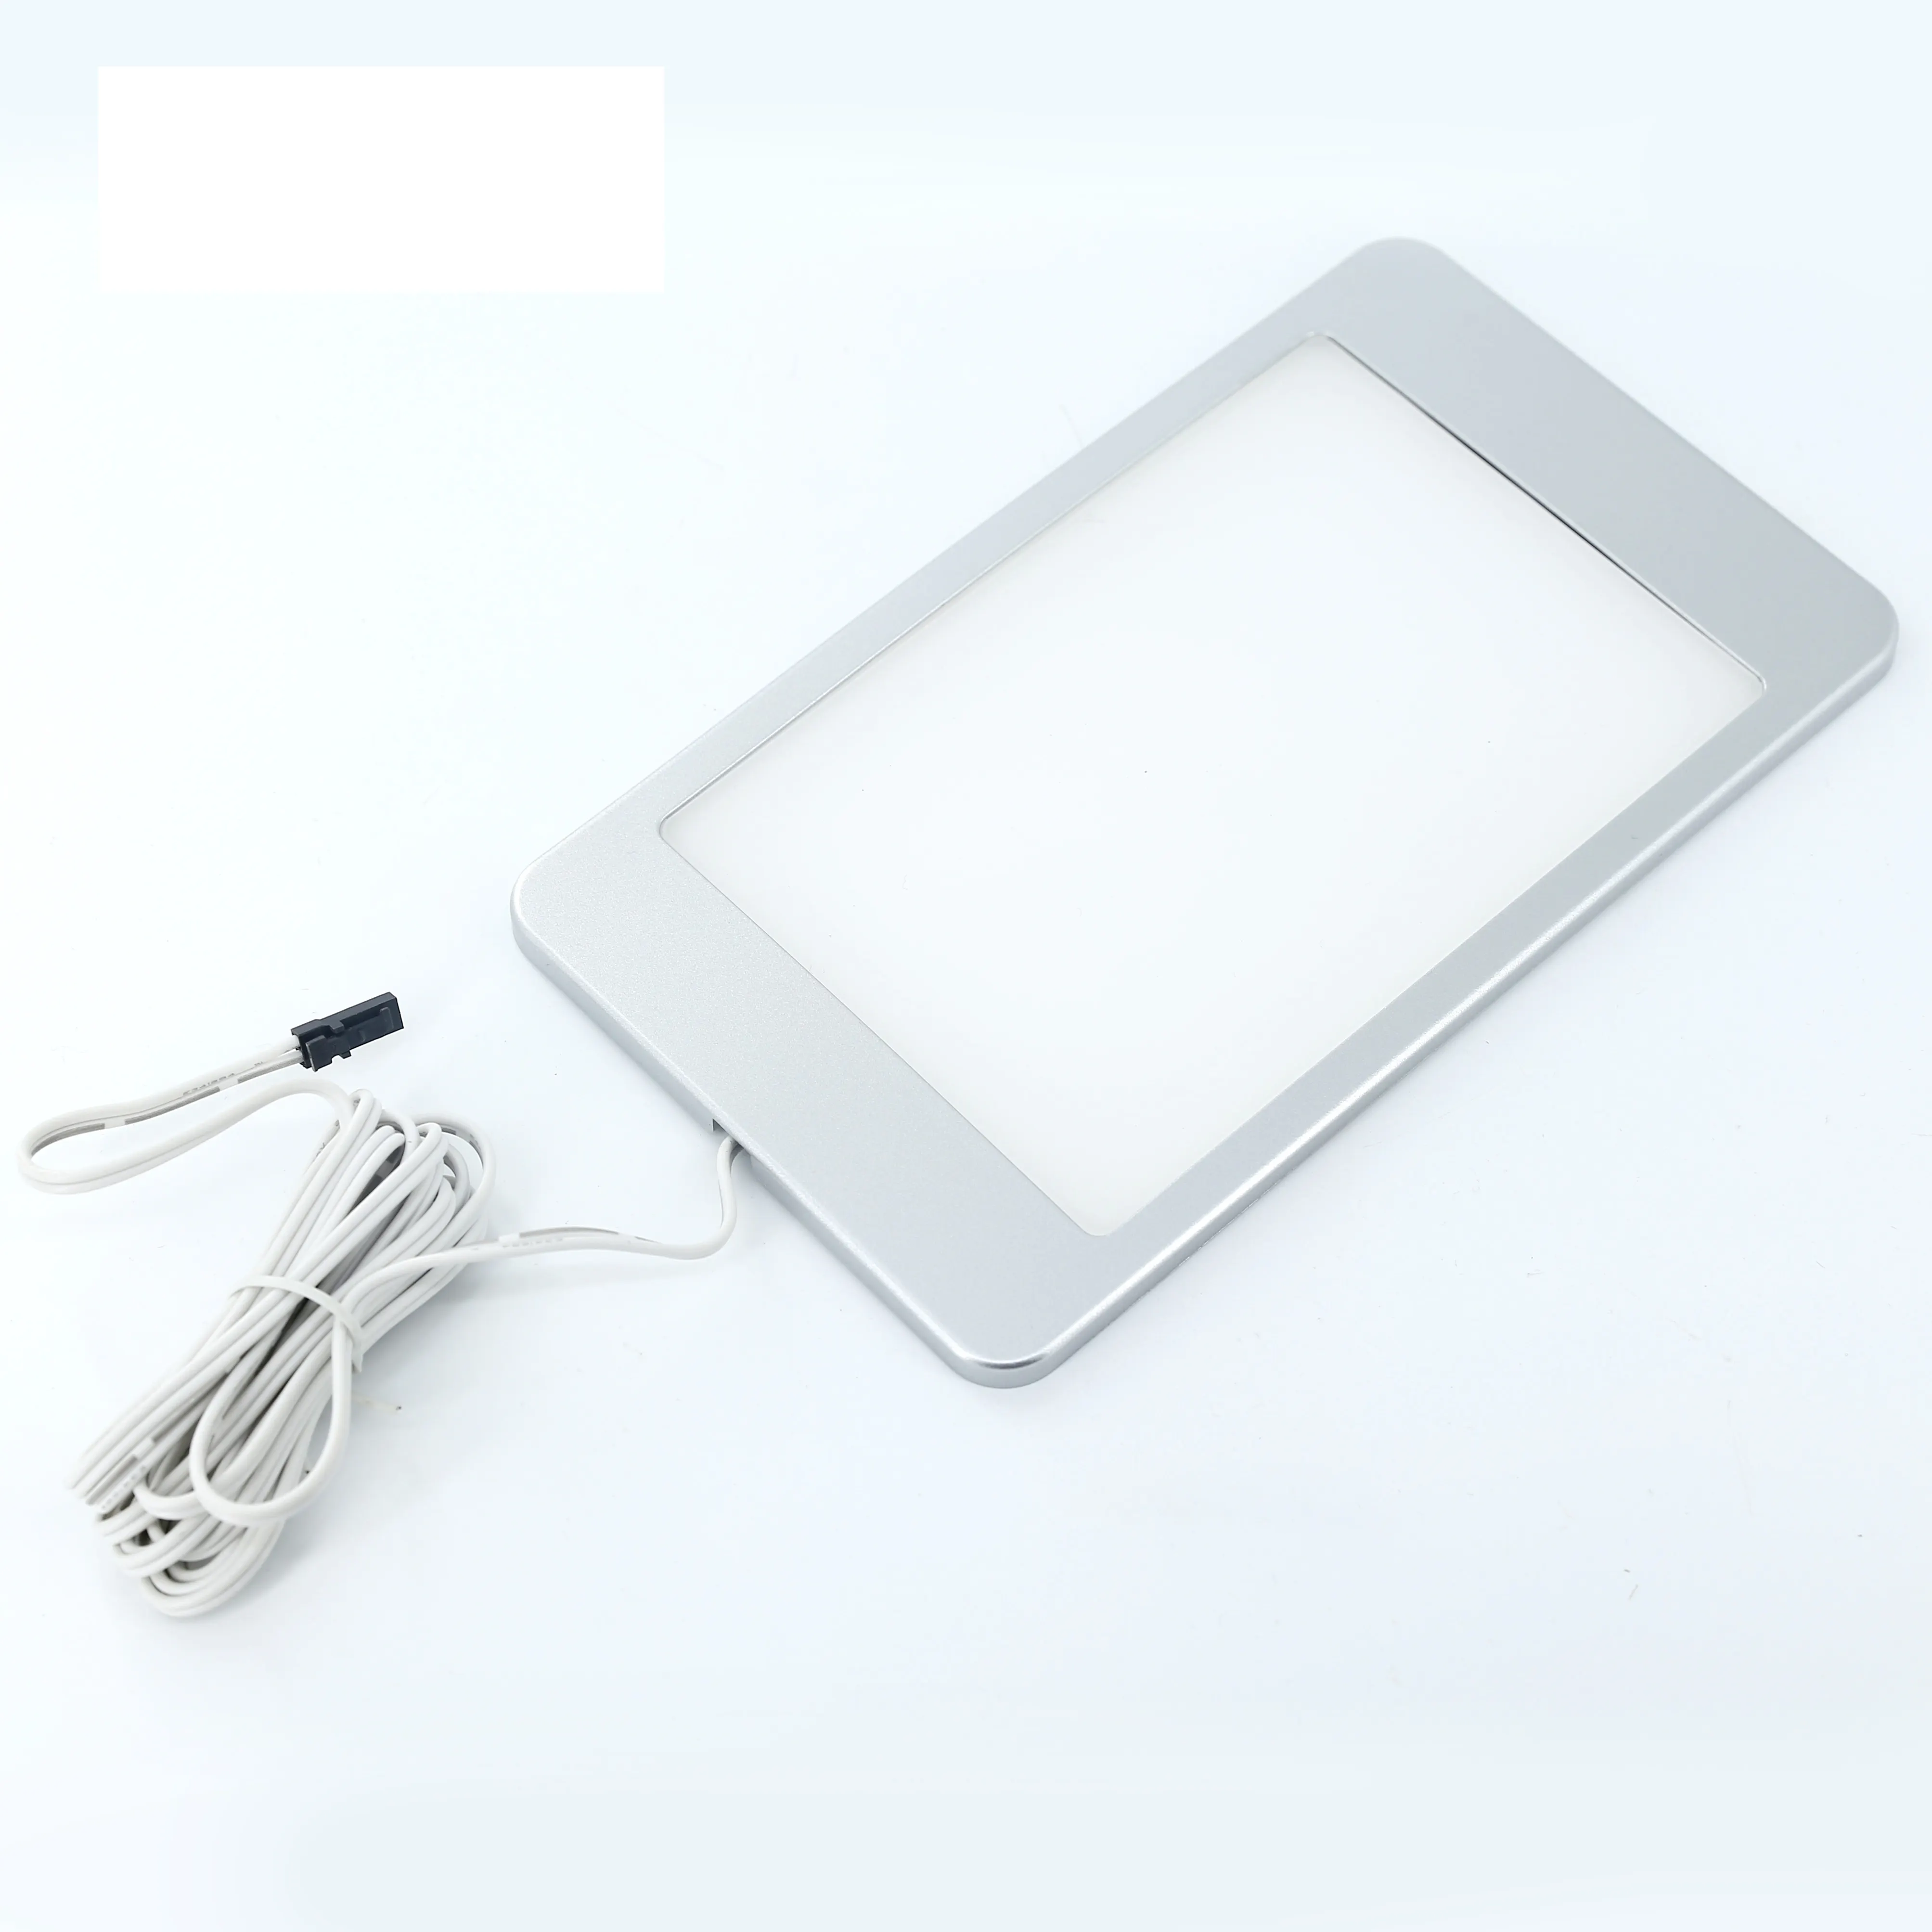 High Quality LED Flat Panel Lights For Office With Dimmable And Color Temperature Control